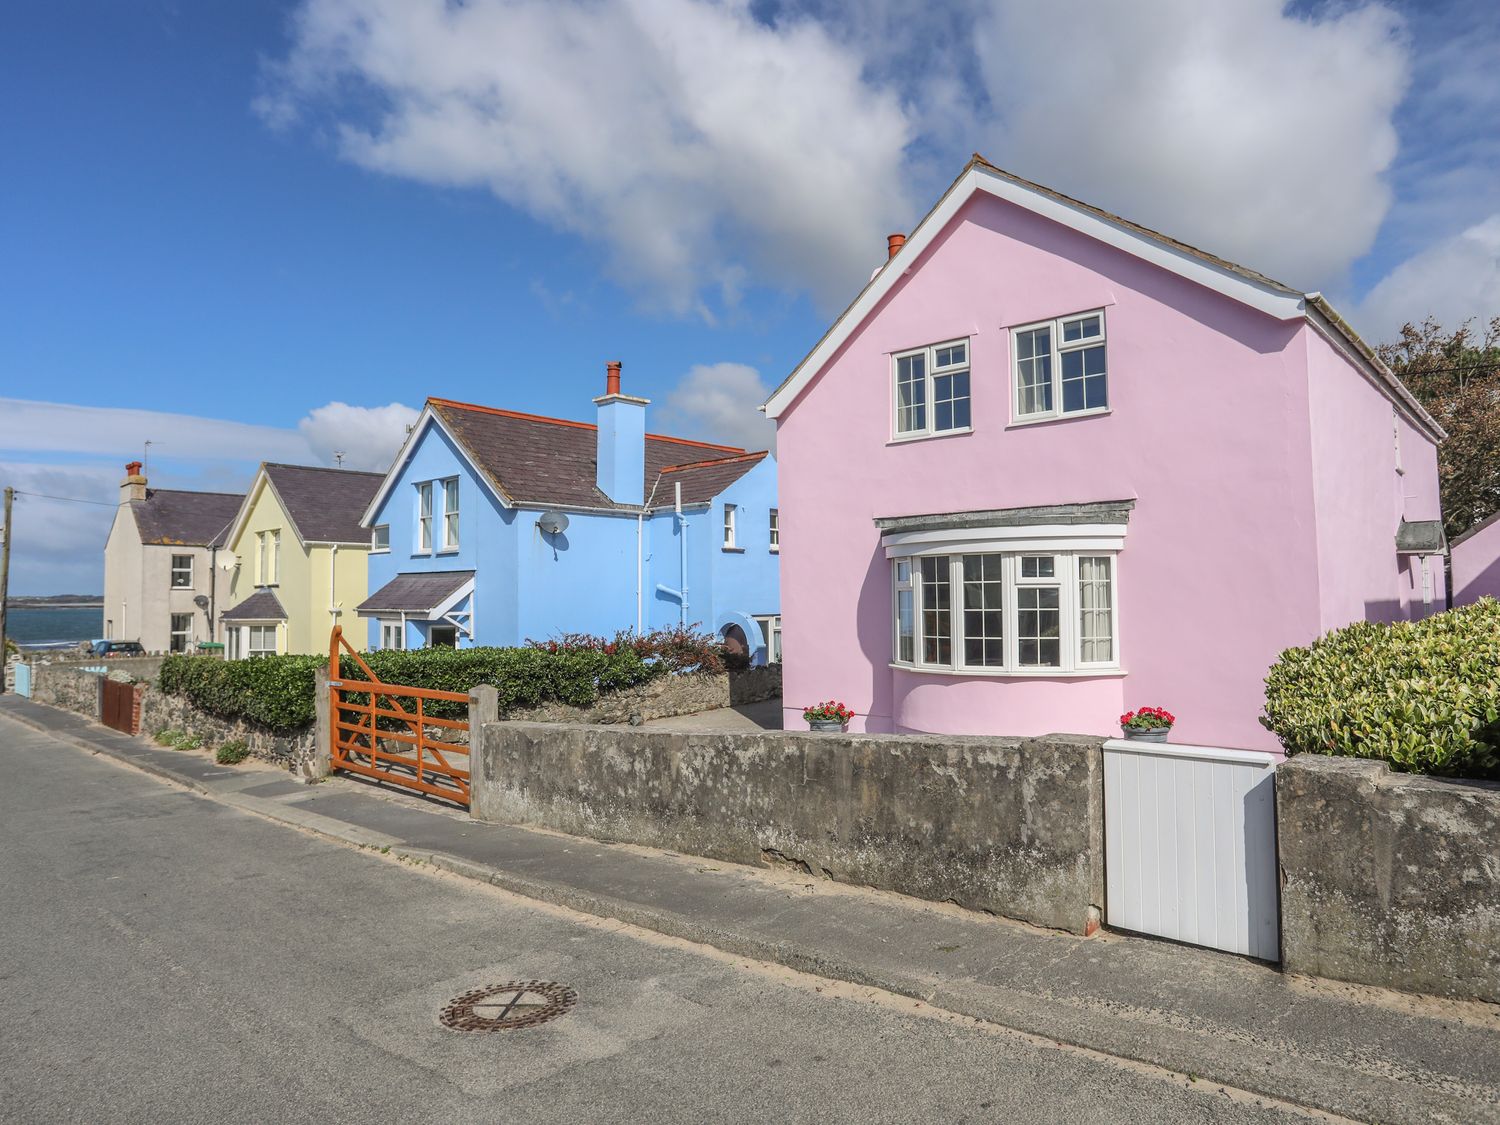 The Pink House - Anglesey - 1017927 - photo 1